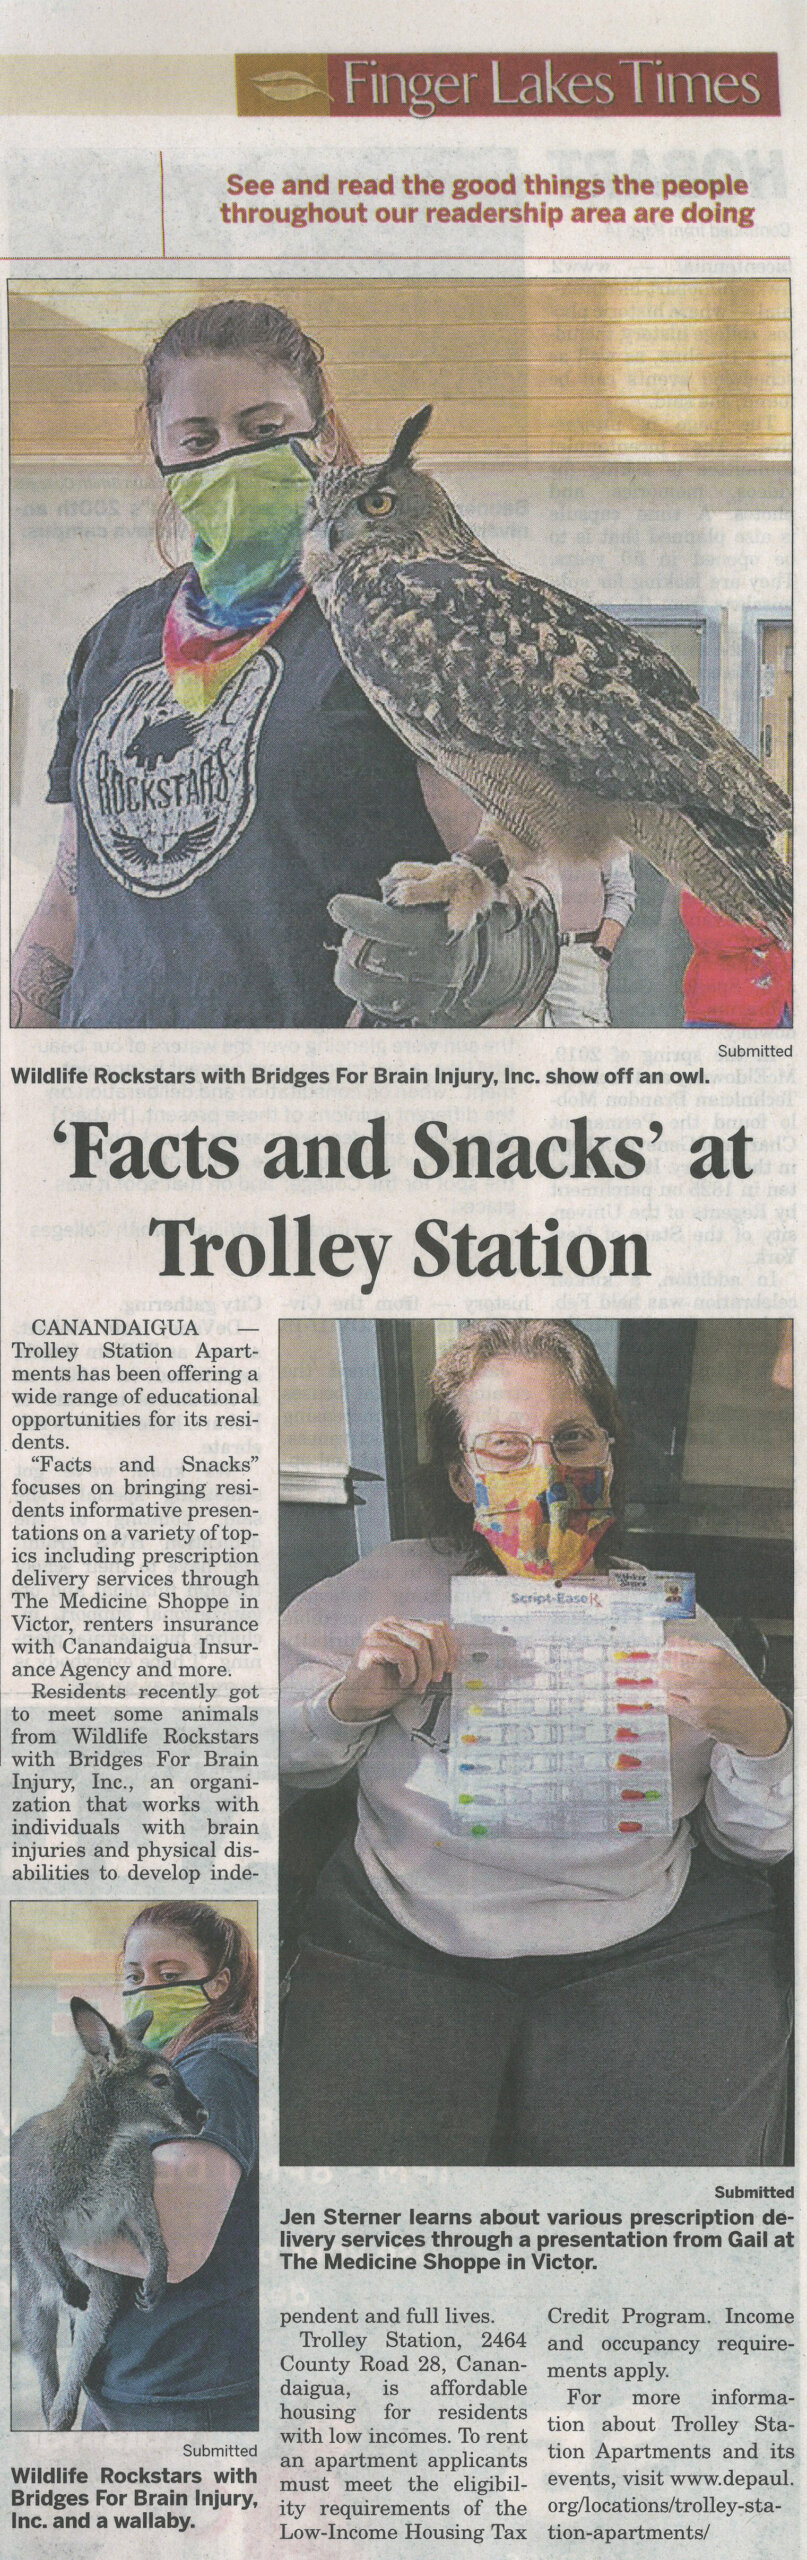 Trolley Station Facts And Snacks, 2.19.22 FLT (hard Copy)